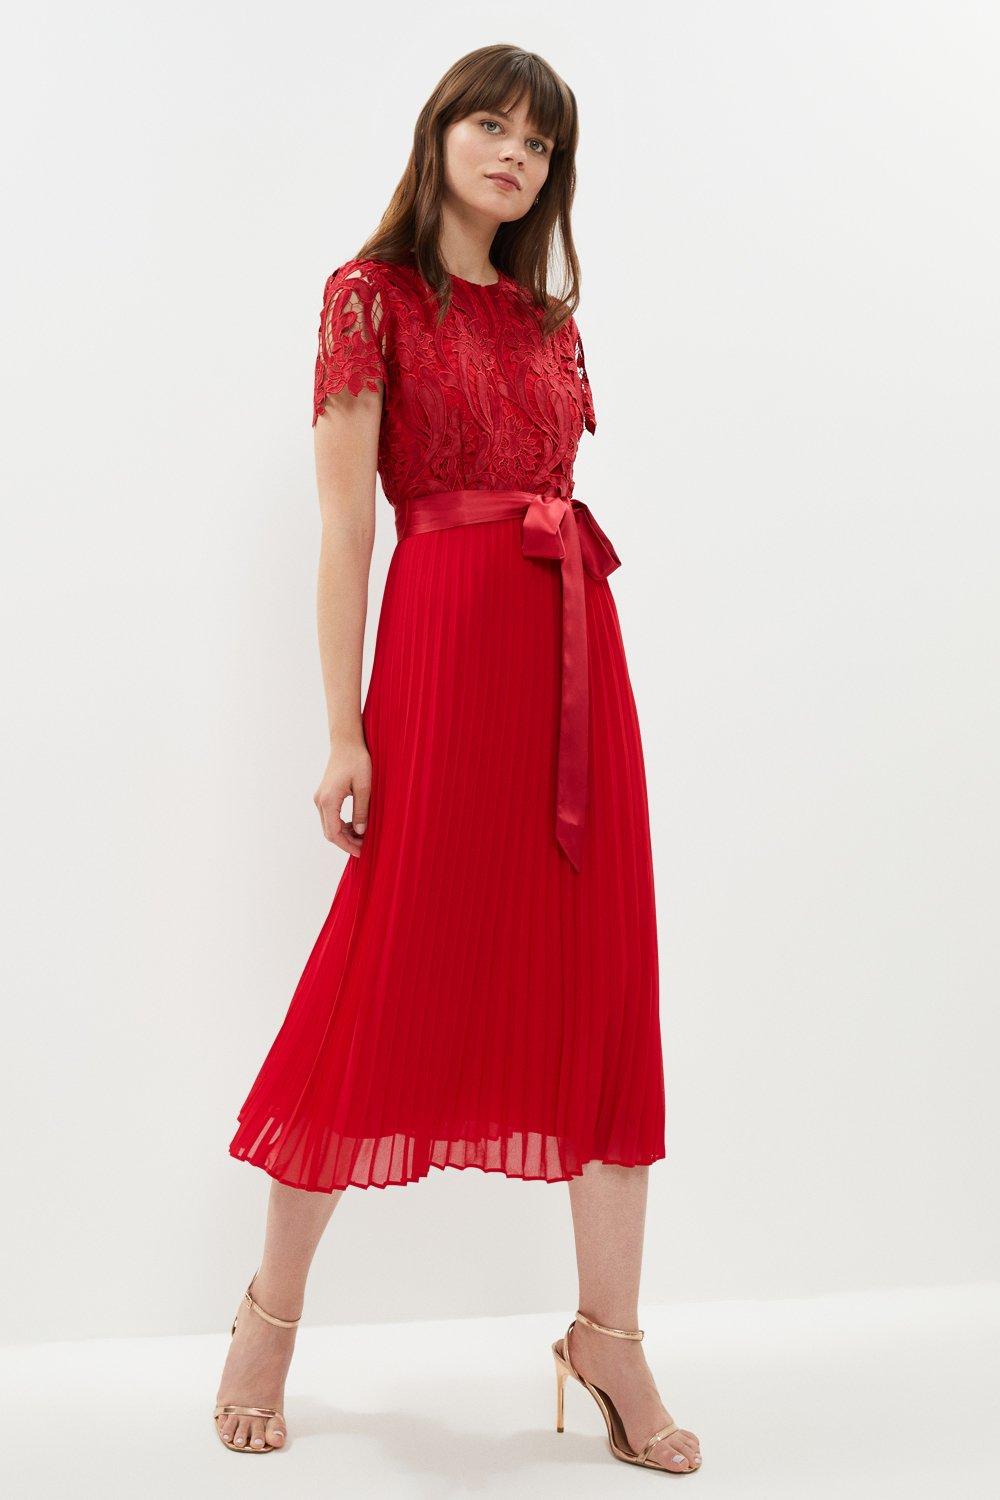 Belted Lace Bodice Pleat Skirt Midi Dress - Red